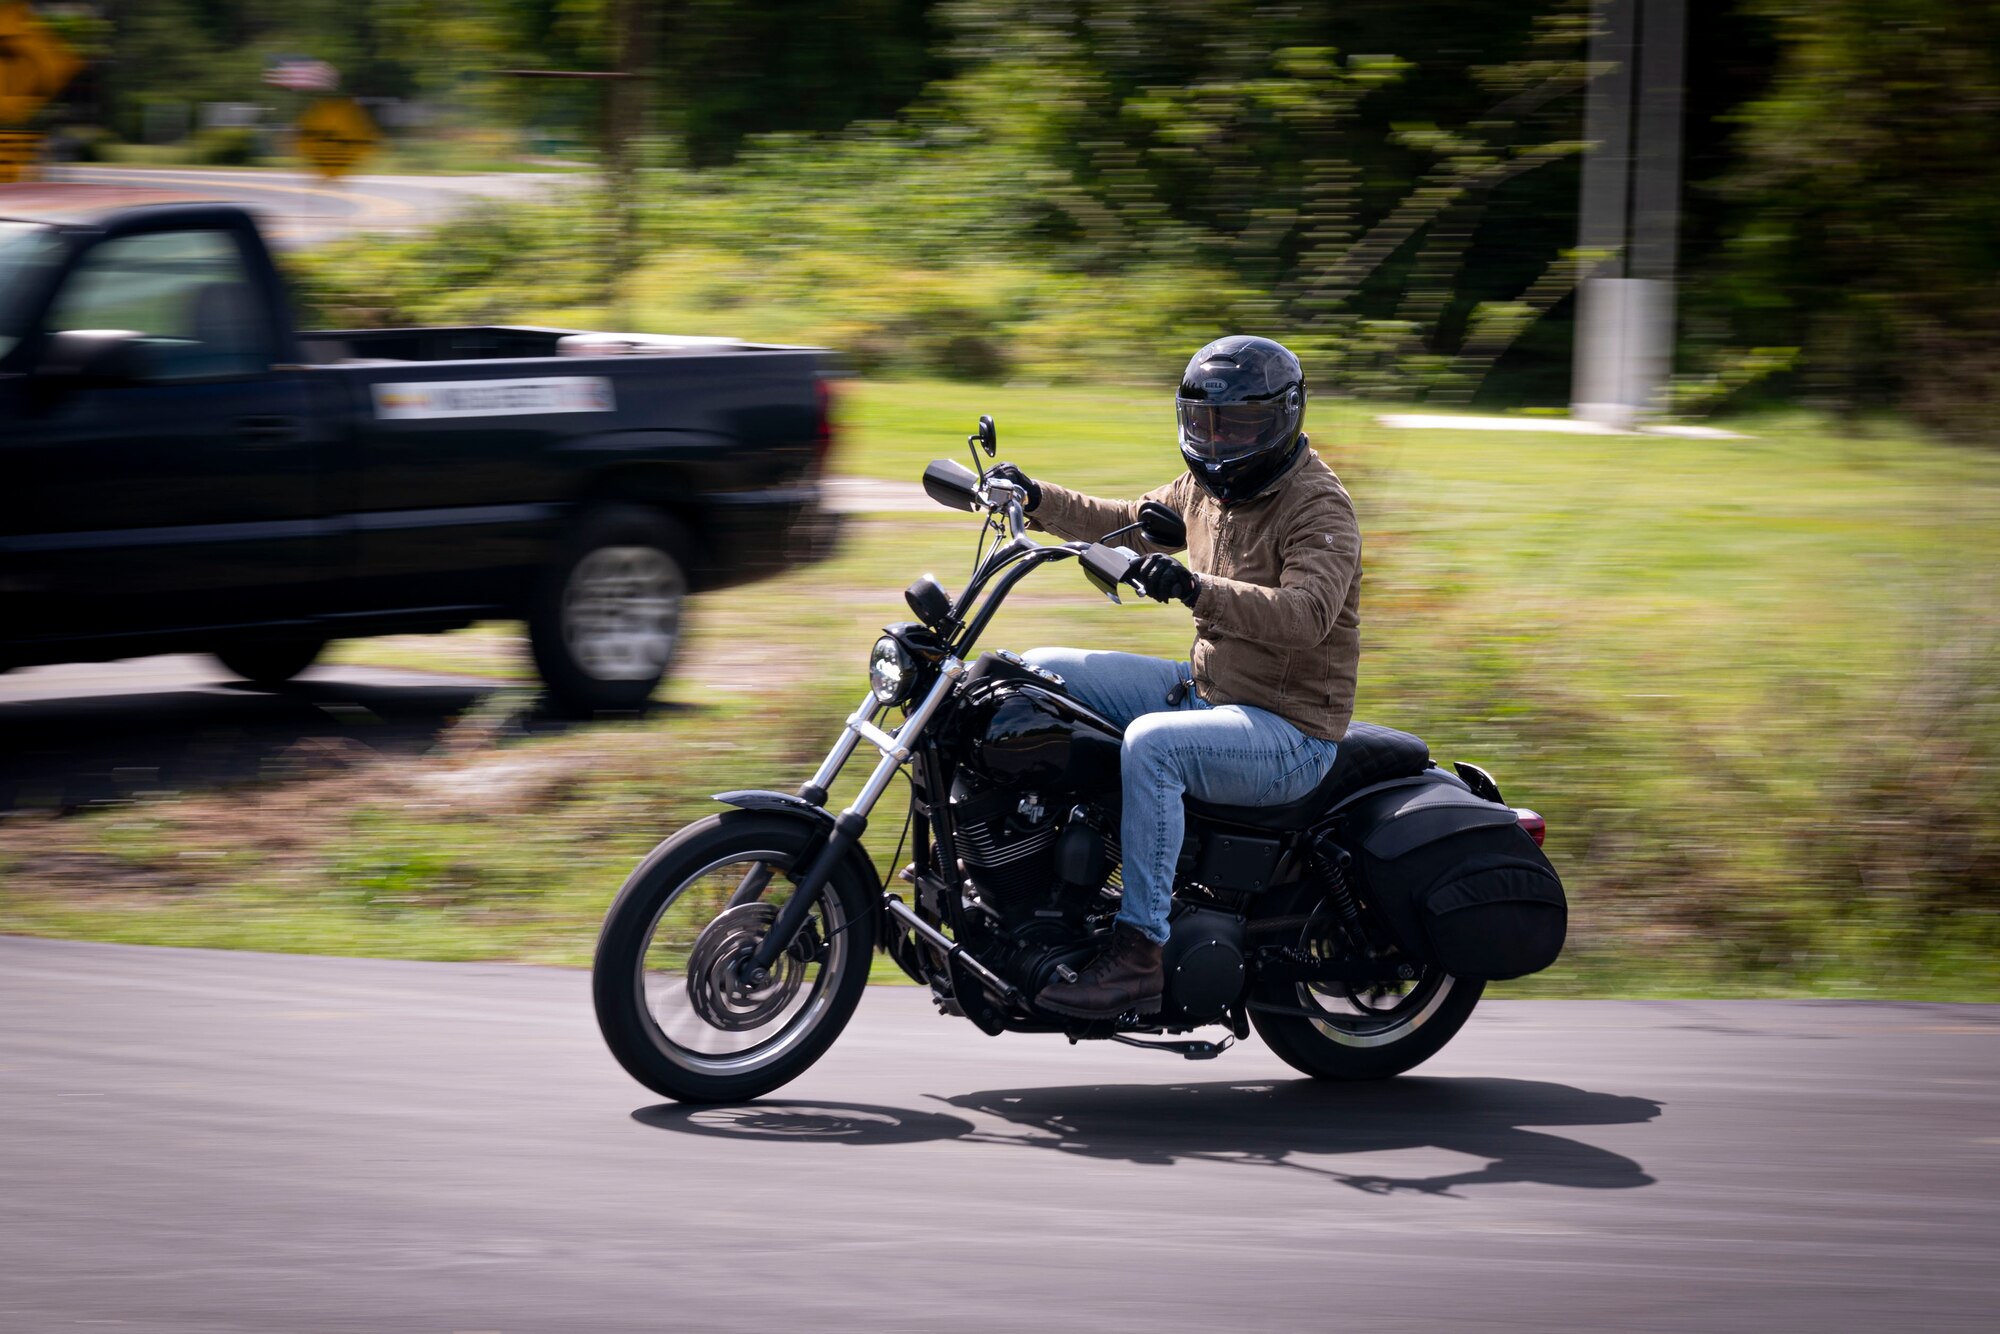 A person is riding a motorcycle.